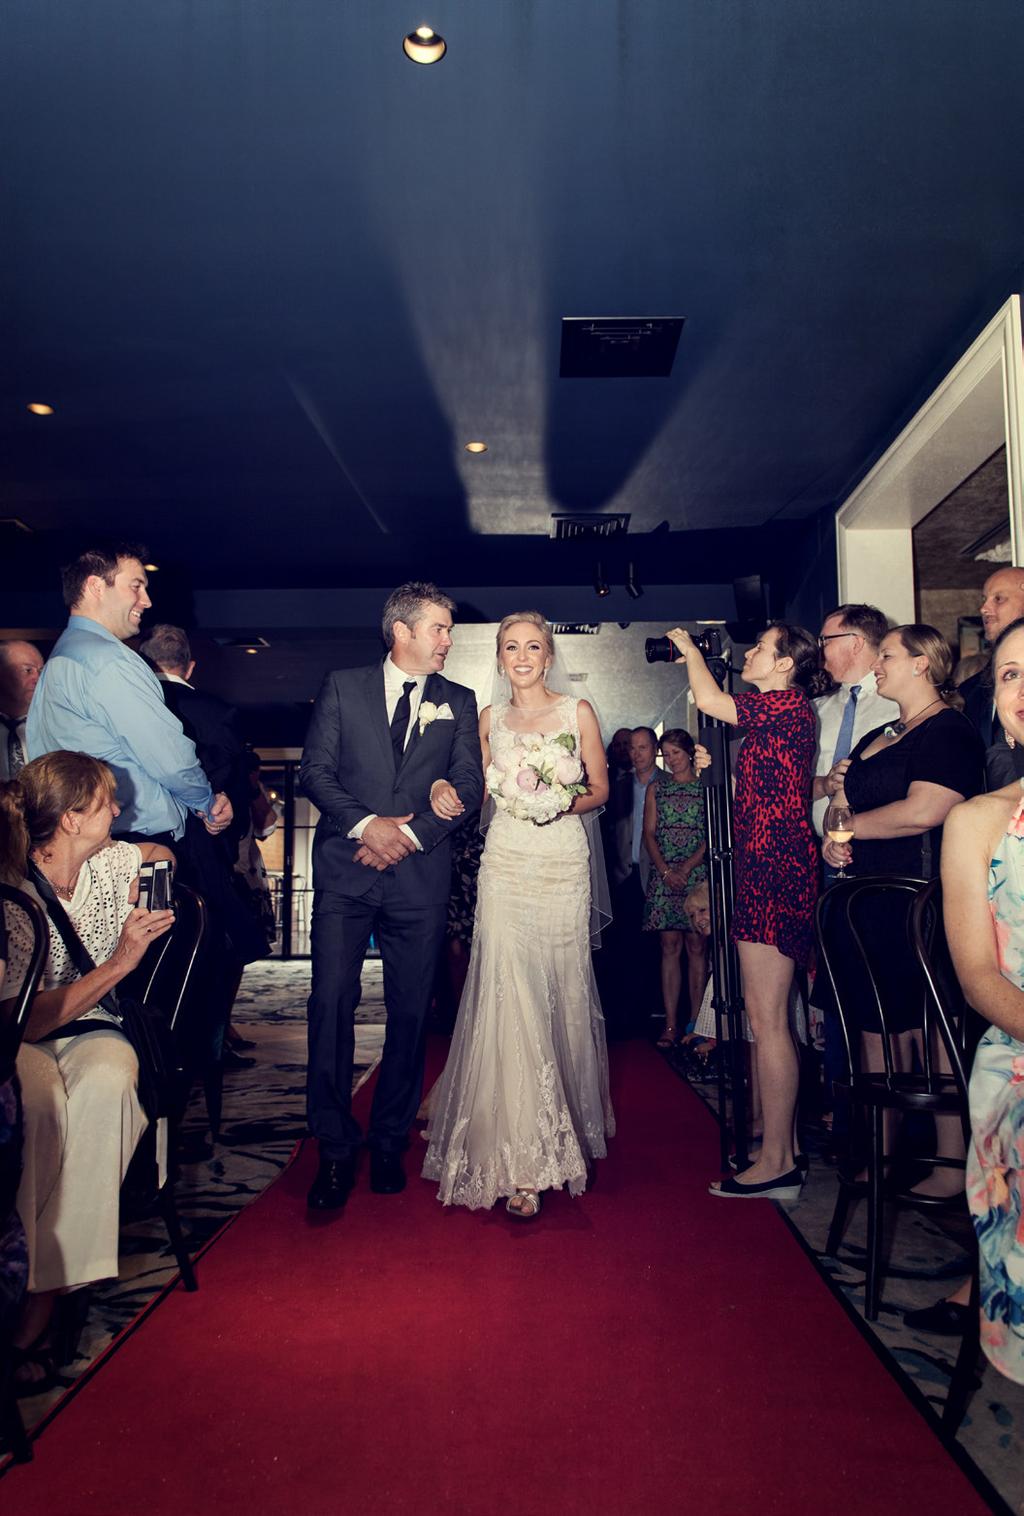 Wedding Options Hotel Brighton offers couples a relaxed wedding ceremony and reception, where we are flexible according to your styling, season and size of your wedding.